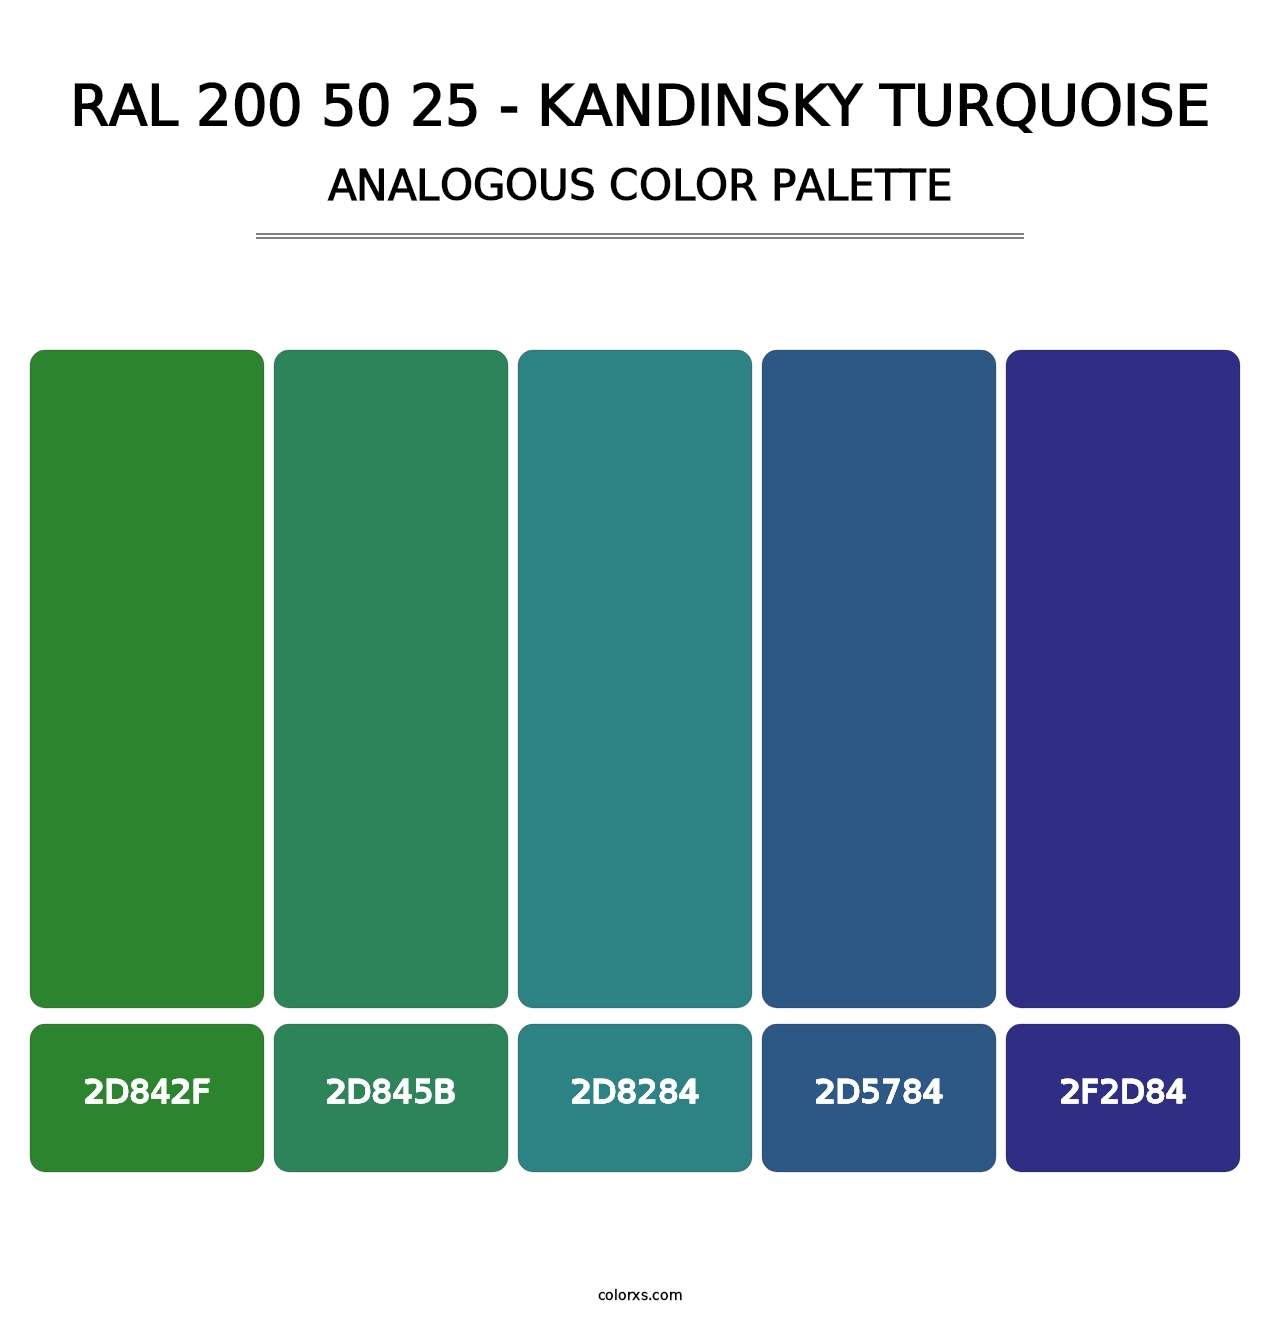 RAL 200 50 25 - Kandinsky Turquoise - Analogous Color Palette